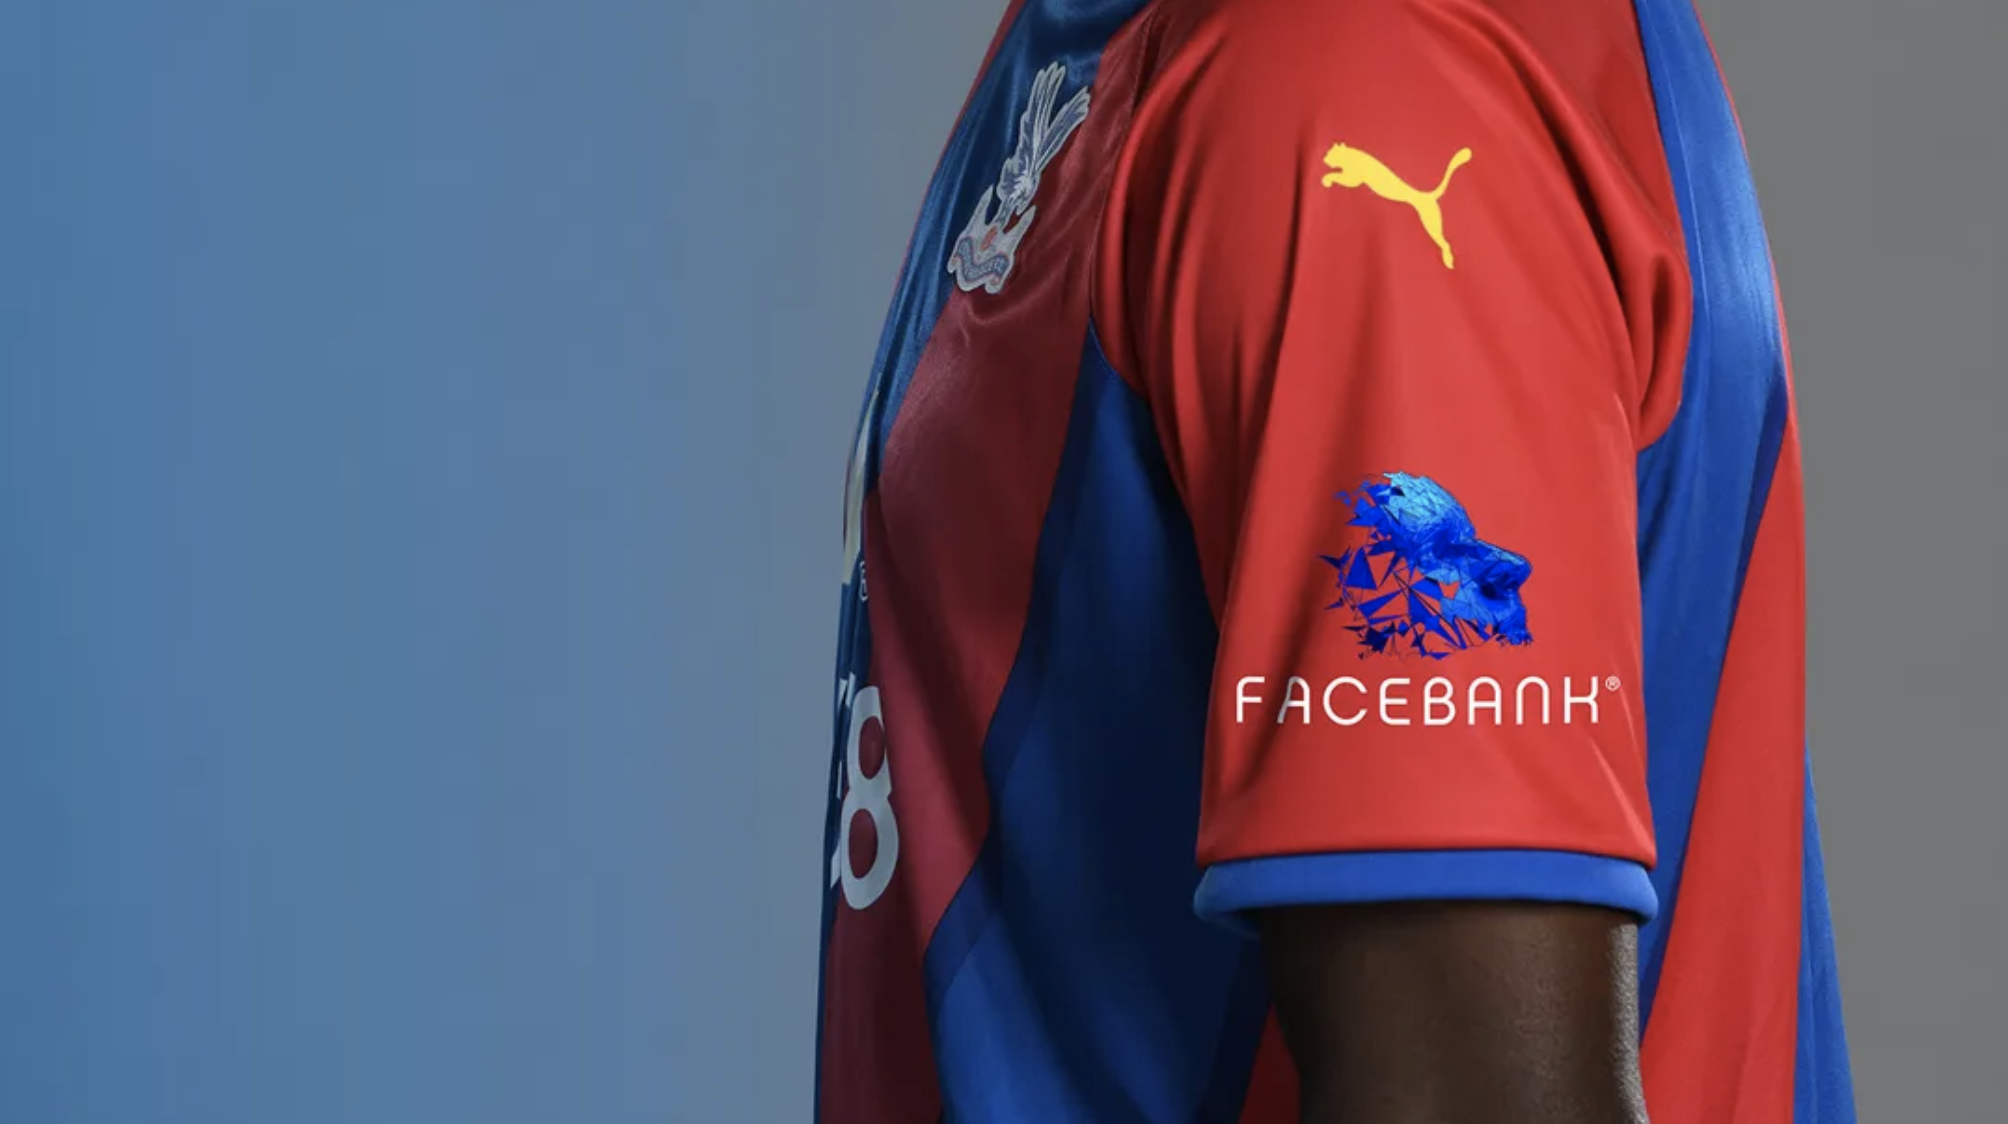 Crystal Palace Replaces W88 with Cinch as Shirt Sponsor